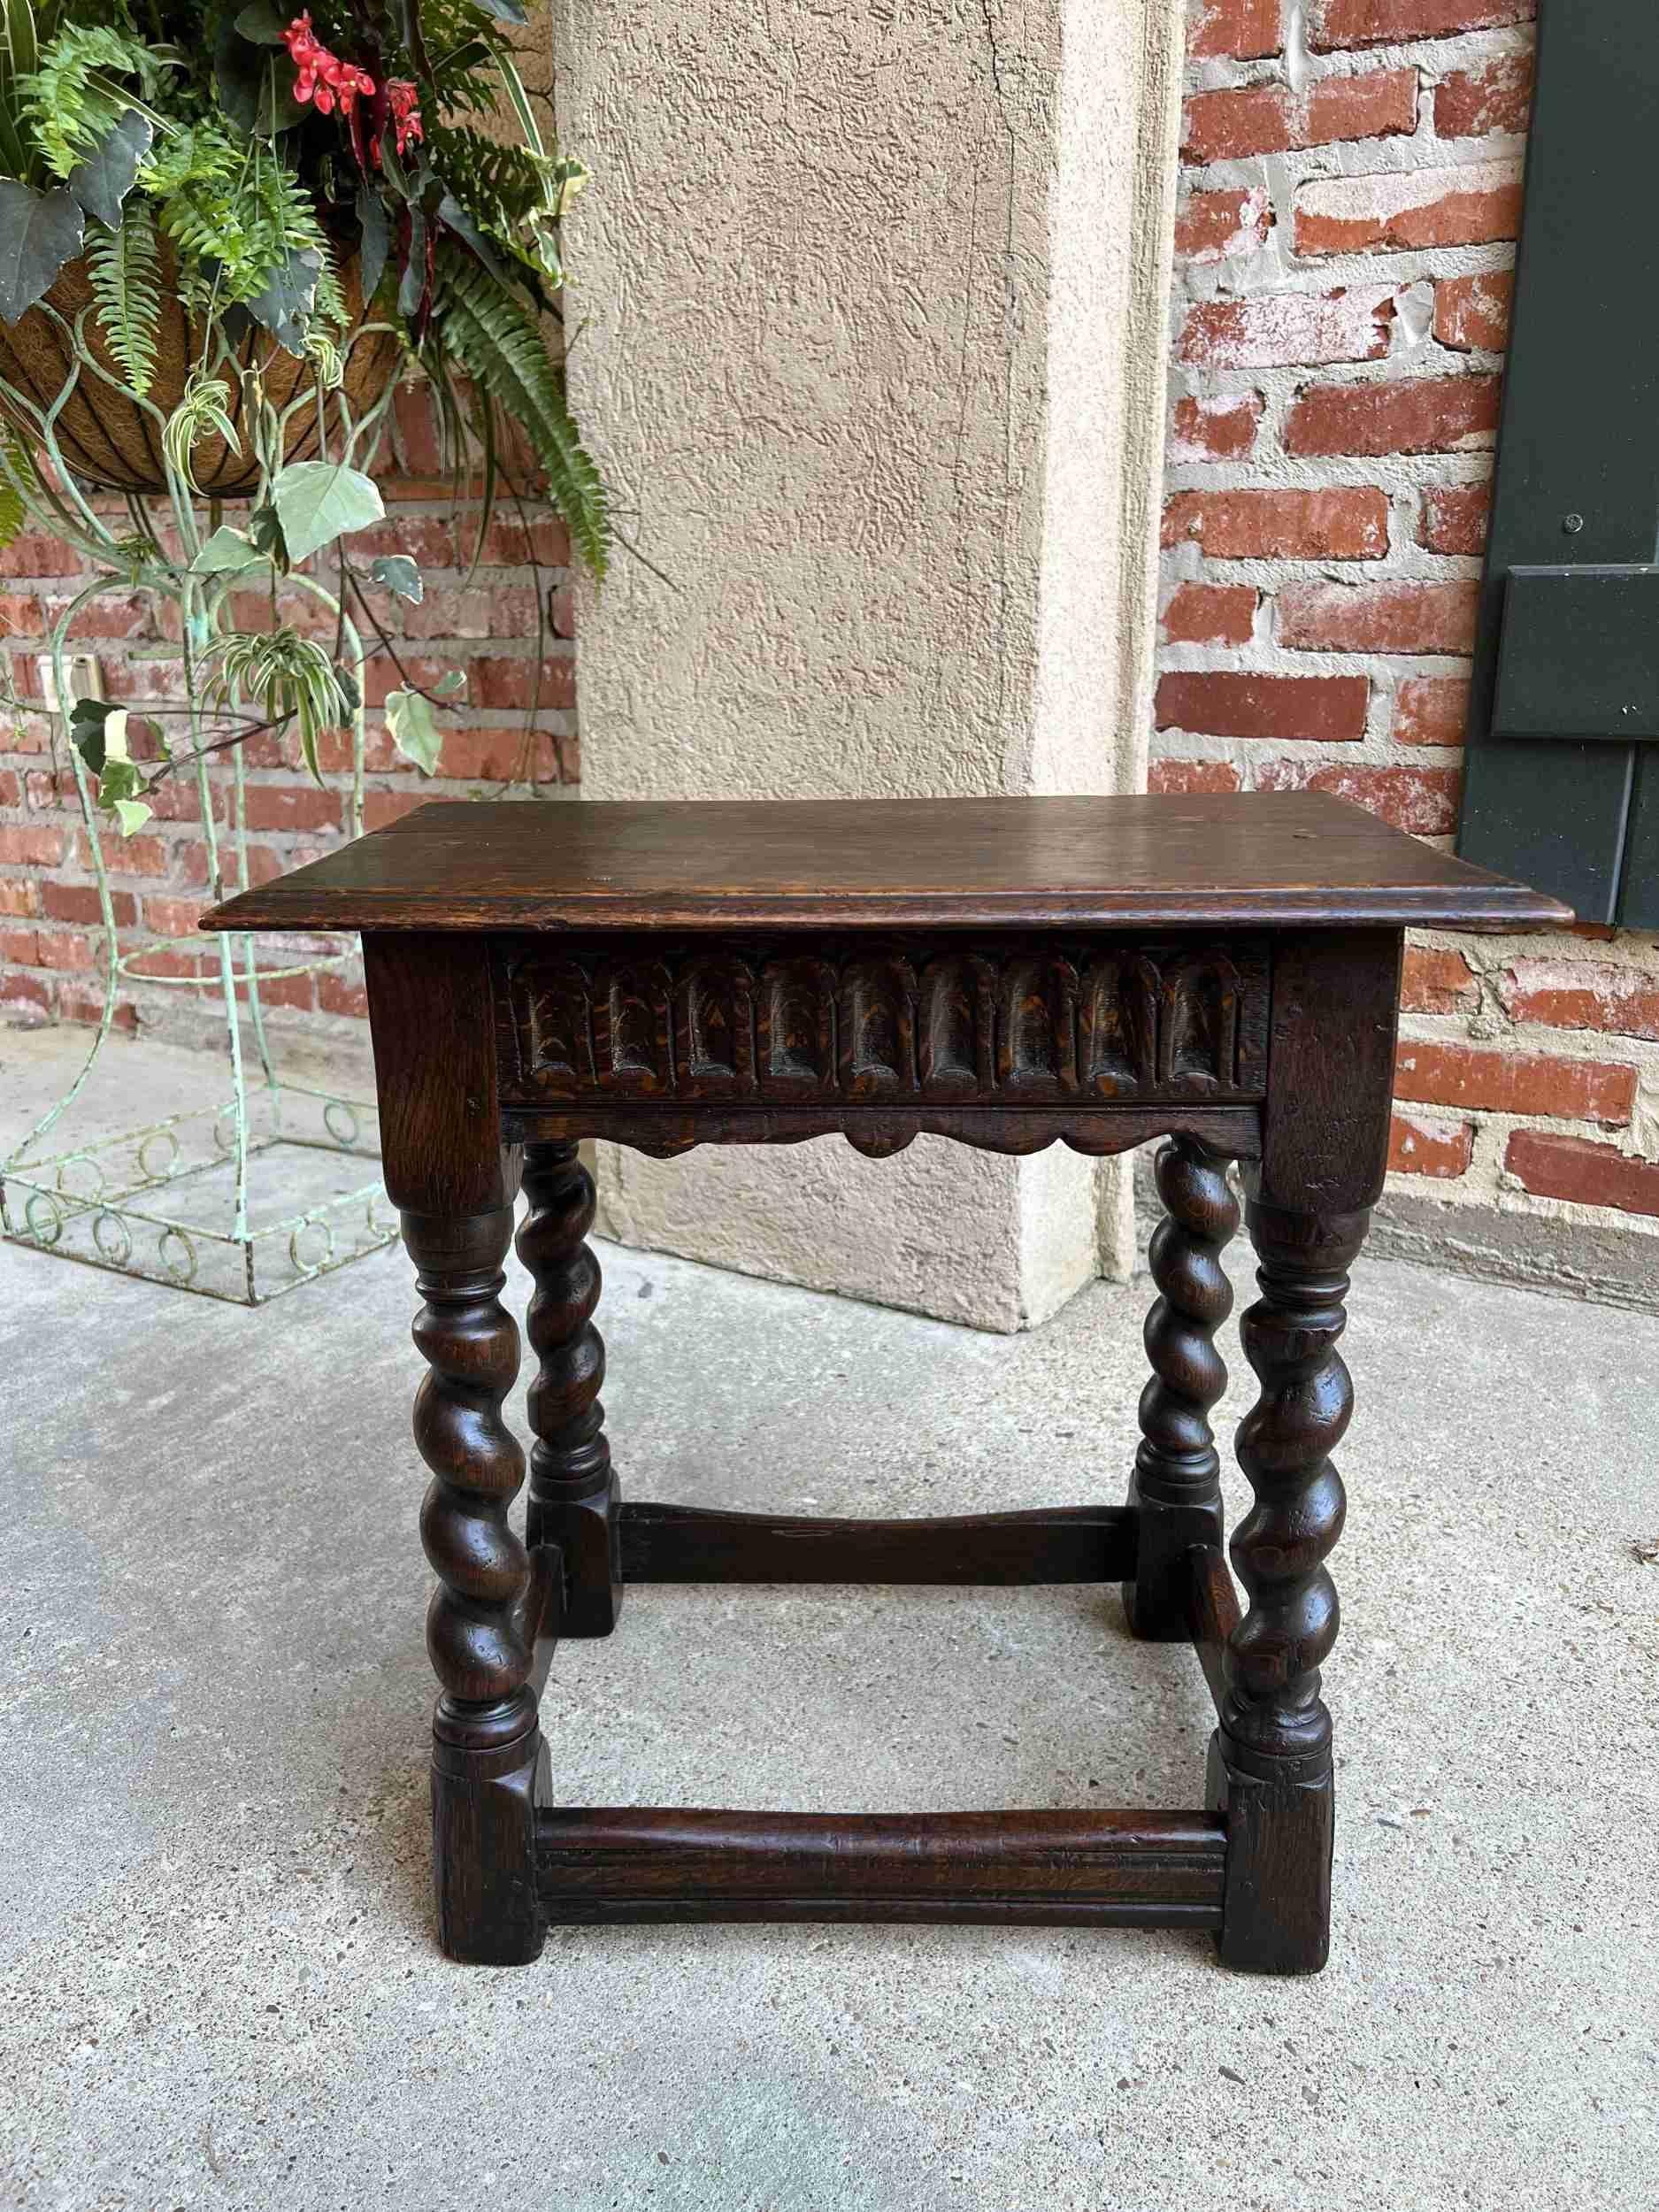 19th century English Carved Oak Jacobean Joint Stool Bench Barley Twist Pegged.

Direct from England, a classic English ‘joint stool’.
One of the most highly requested antiques, these stools or benches are perfect little occasional pieces, whether